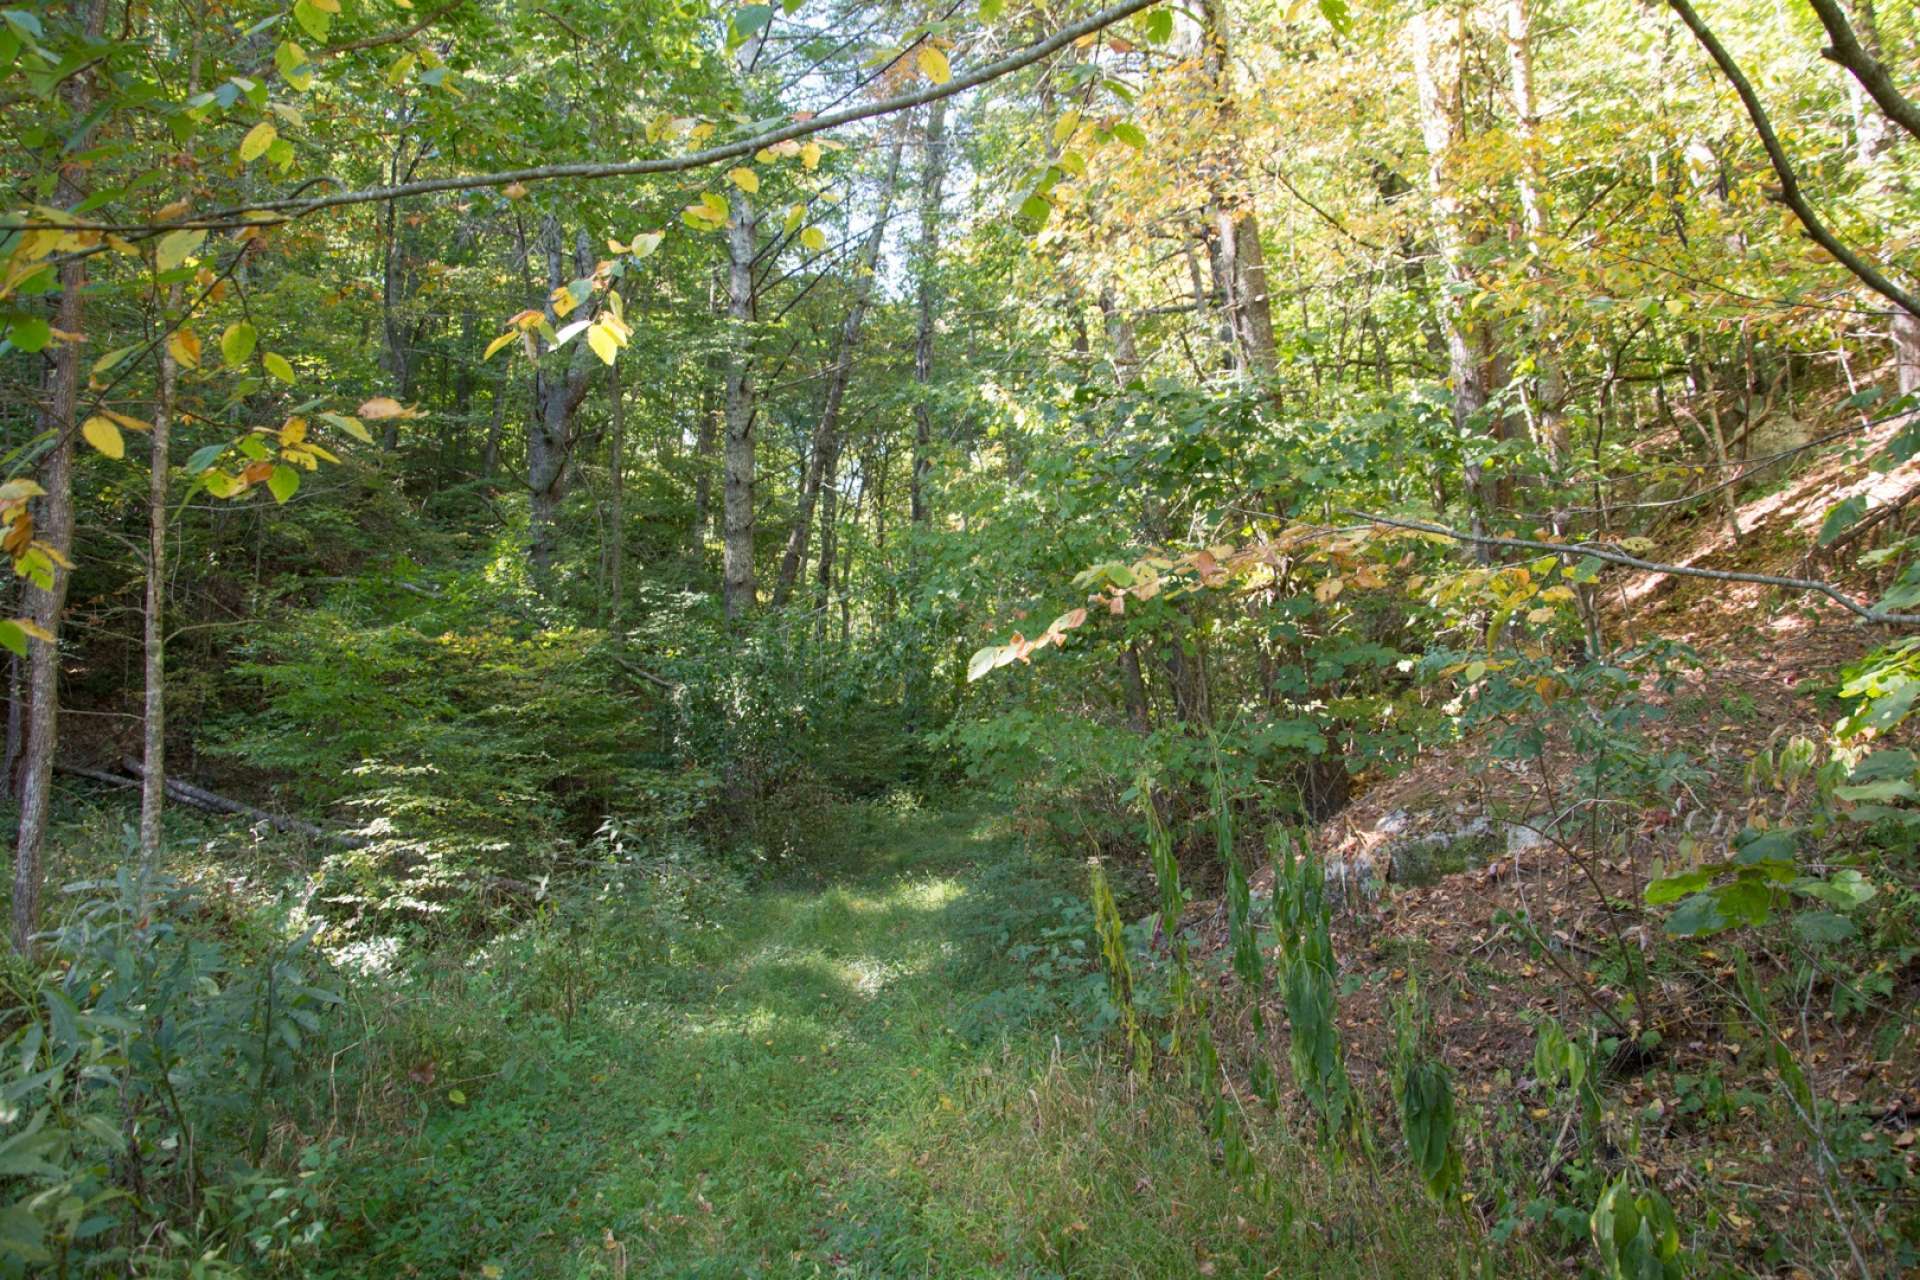 Then take to the woods over the wide trail leading to the top, on foot, ATV's or horses, to enjoy and explore the rest of the property, which...